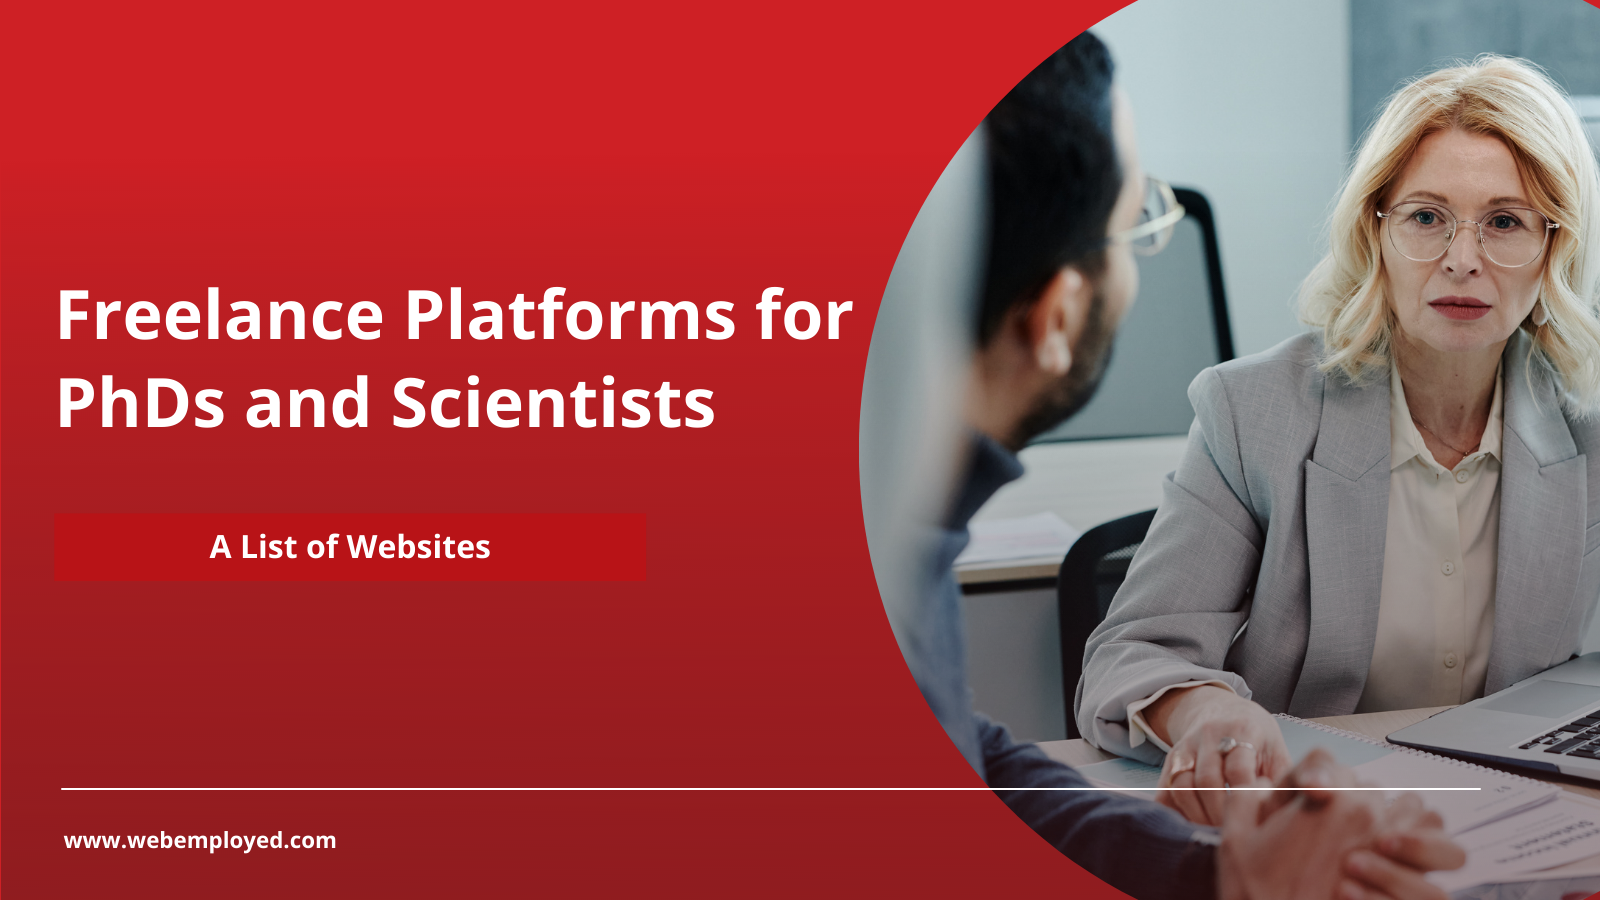 Freelance platforms for PhDs and Scientists